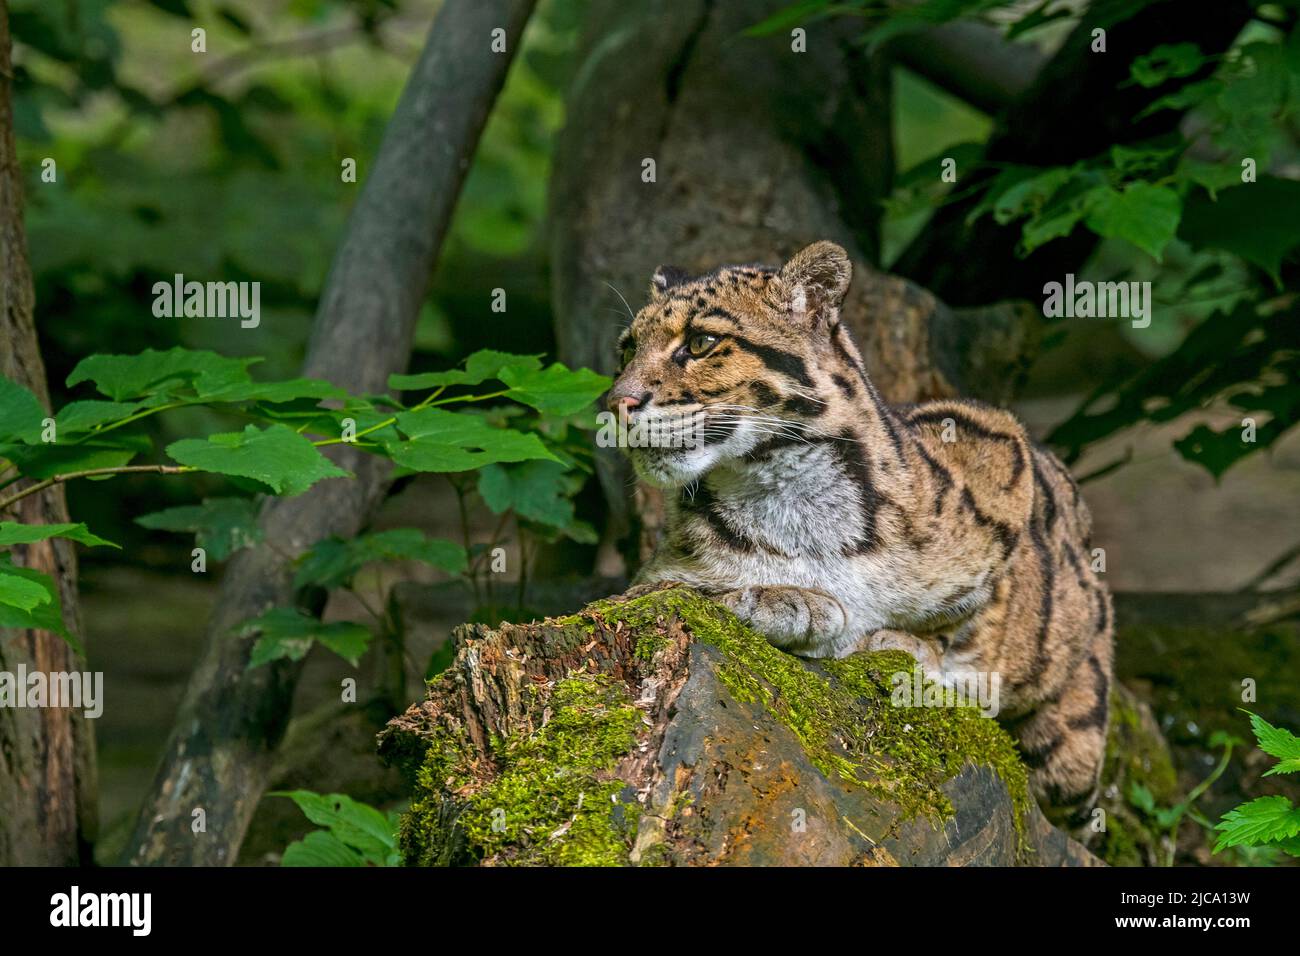 Mainland clouded leopard (Neofelis nebulosa) wild cat native to the foothills of the Himalayas through mainland Southeast Asia into South China Stock Photo